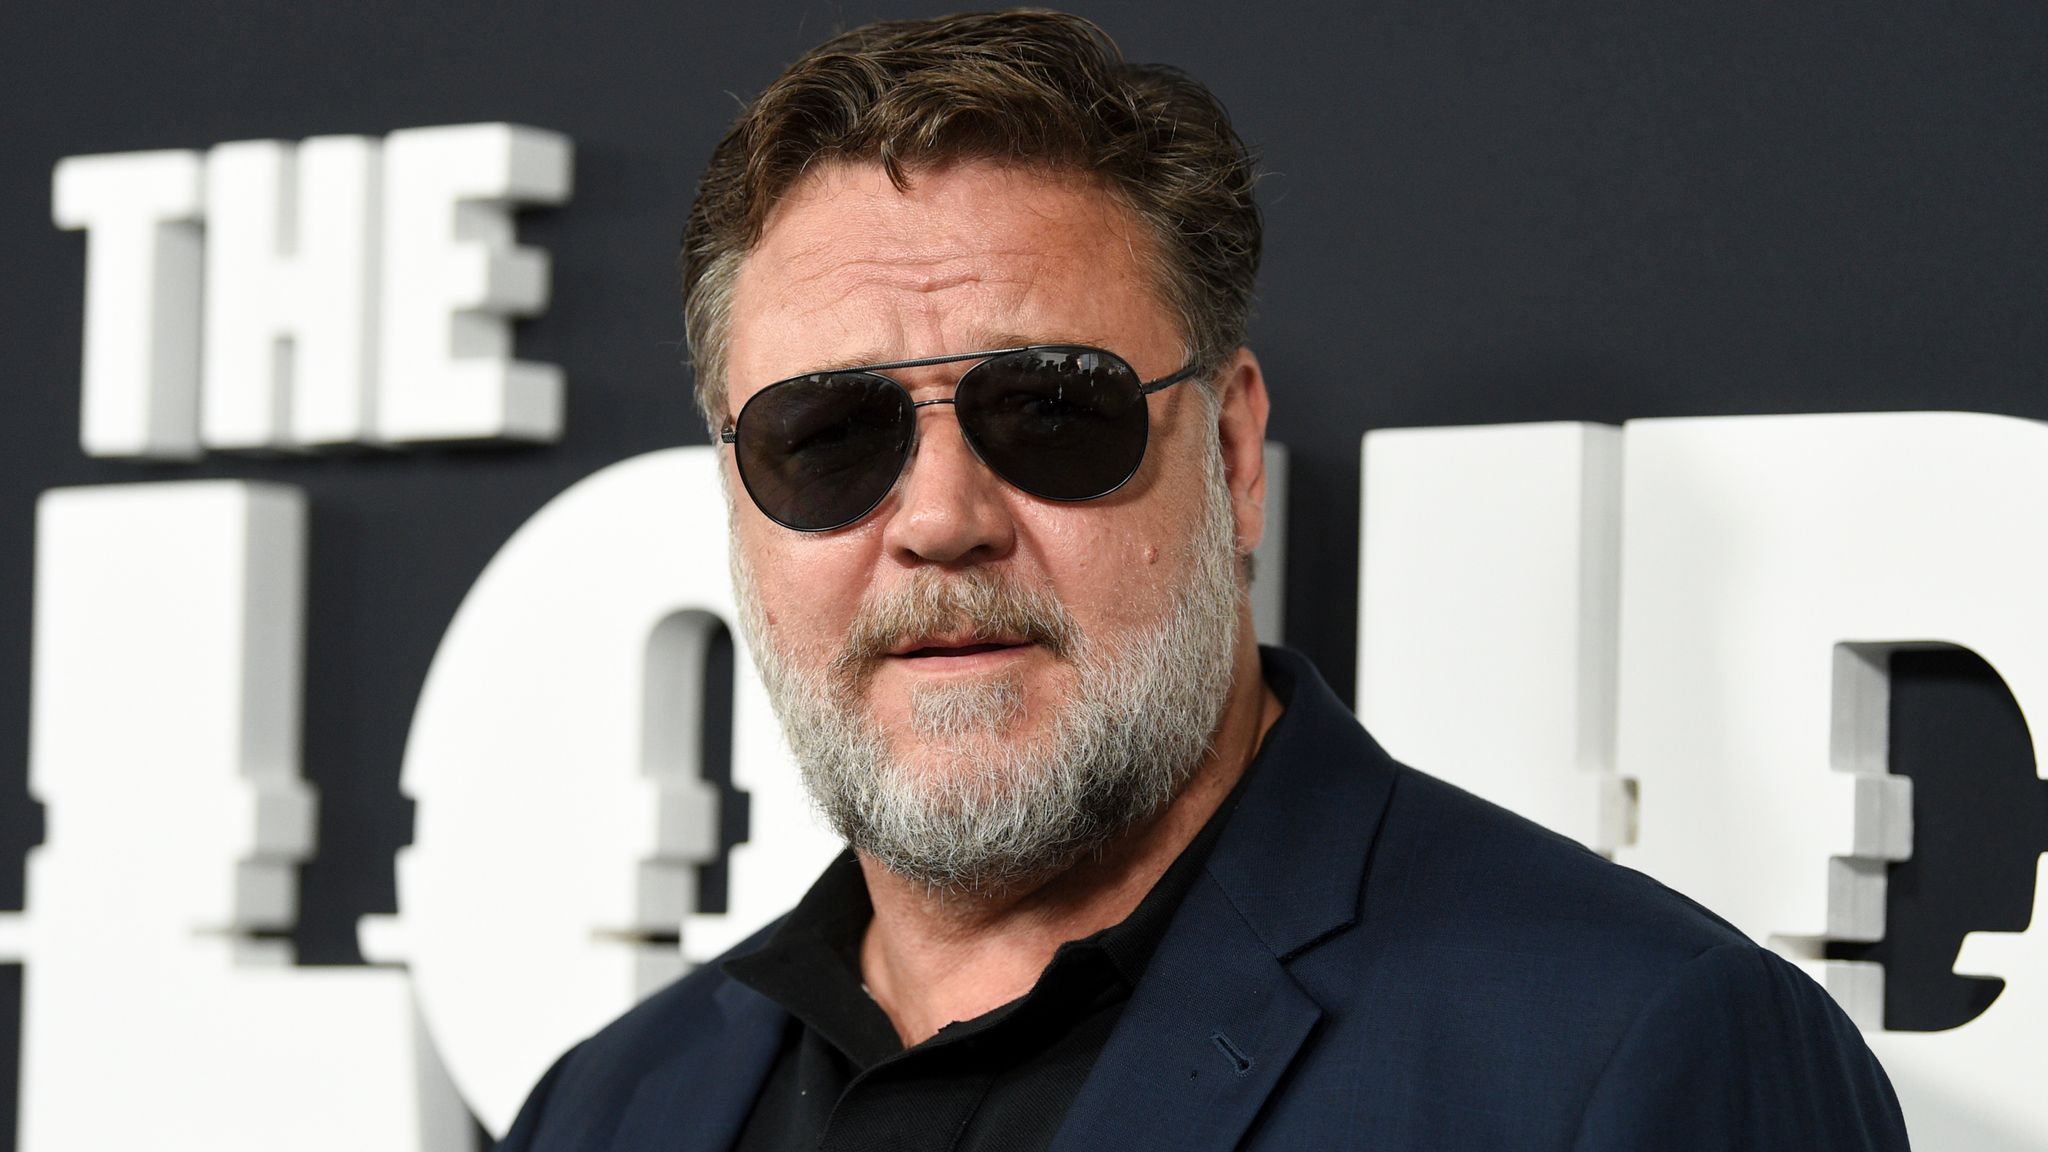 Russell Crowe lands secret role in Marvel movie Thor: Love and